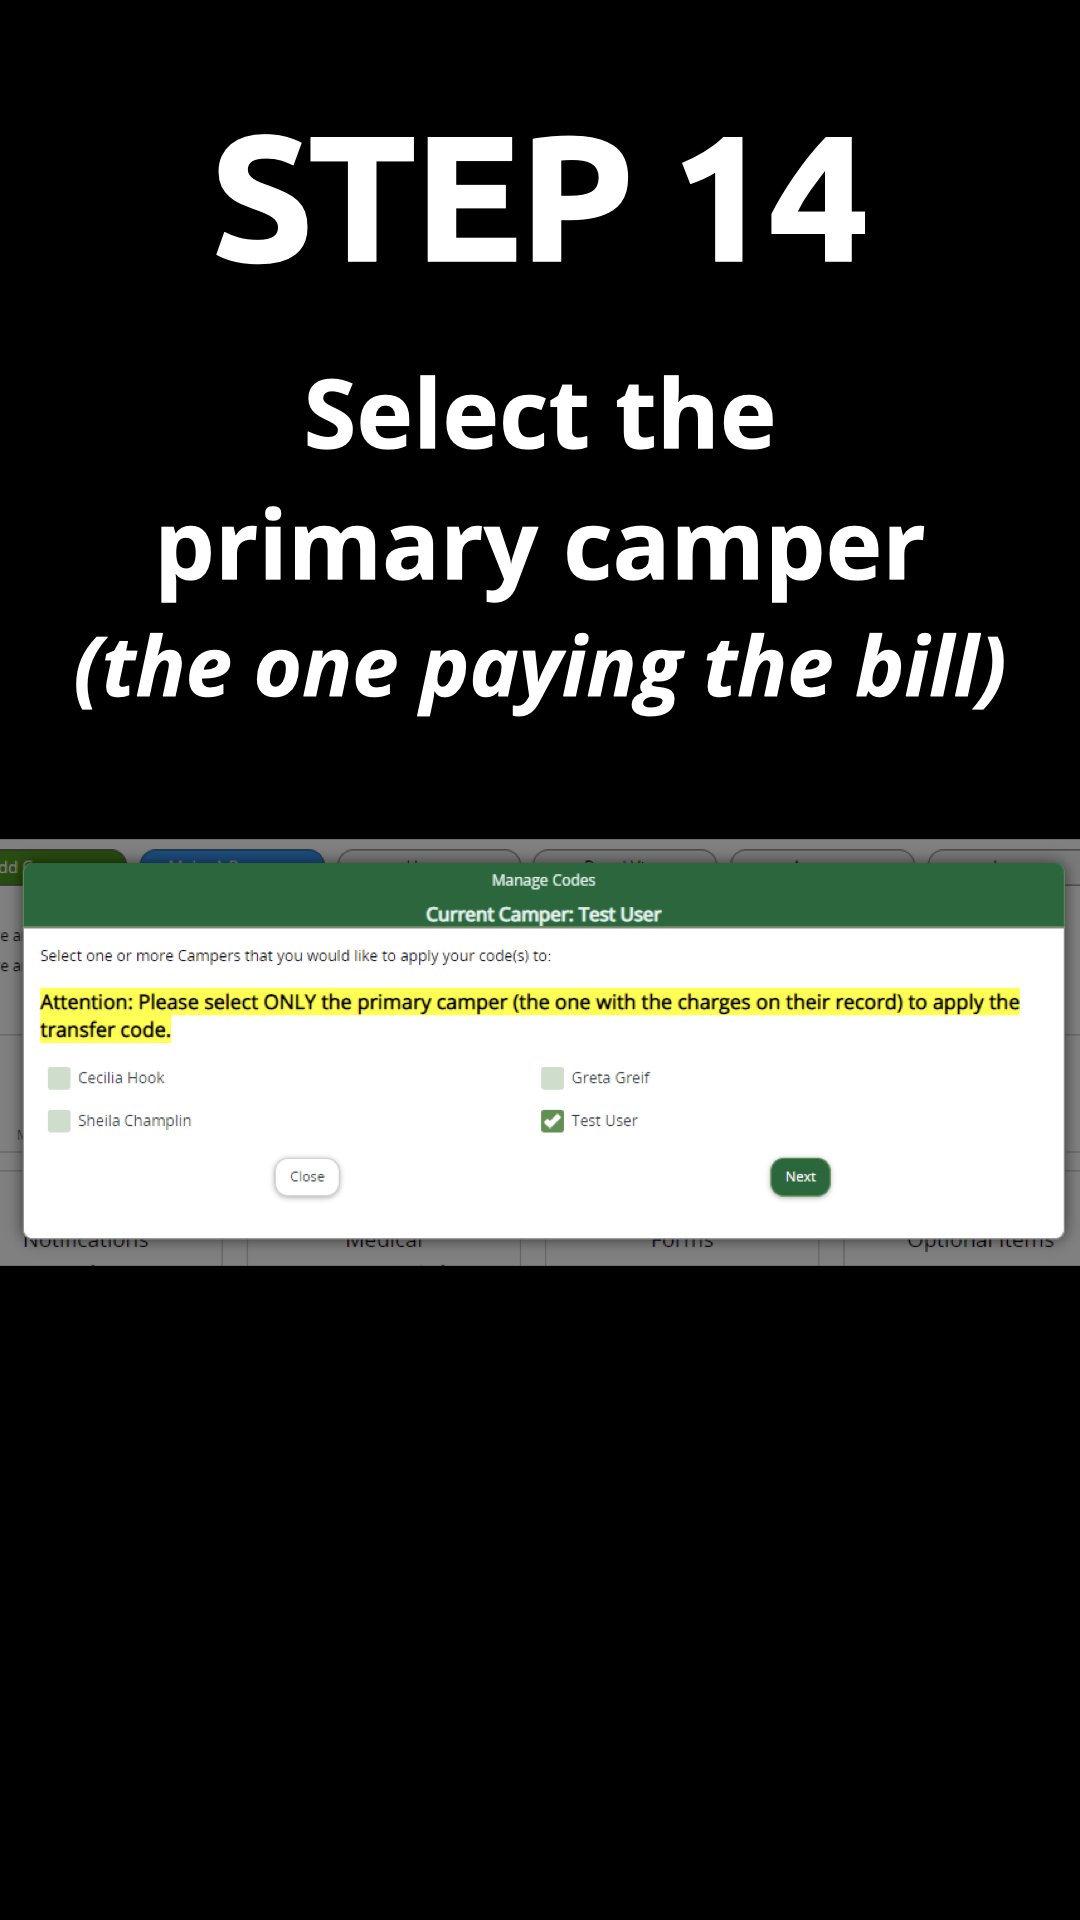  Select the name of the primary camper  (the one making the reservation and paying the bill)  